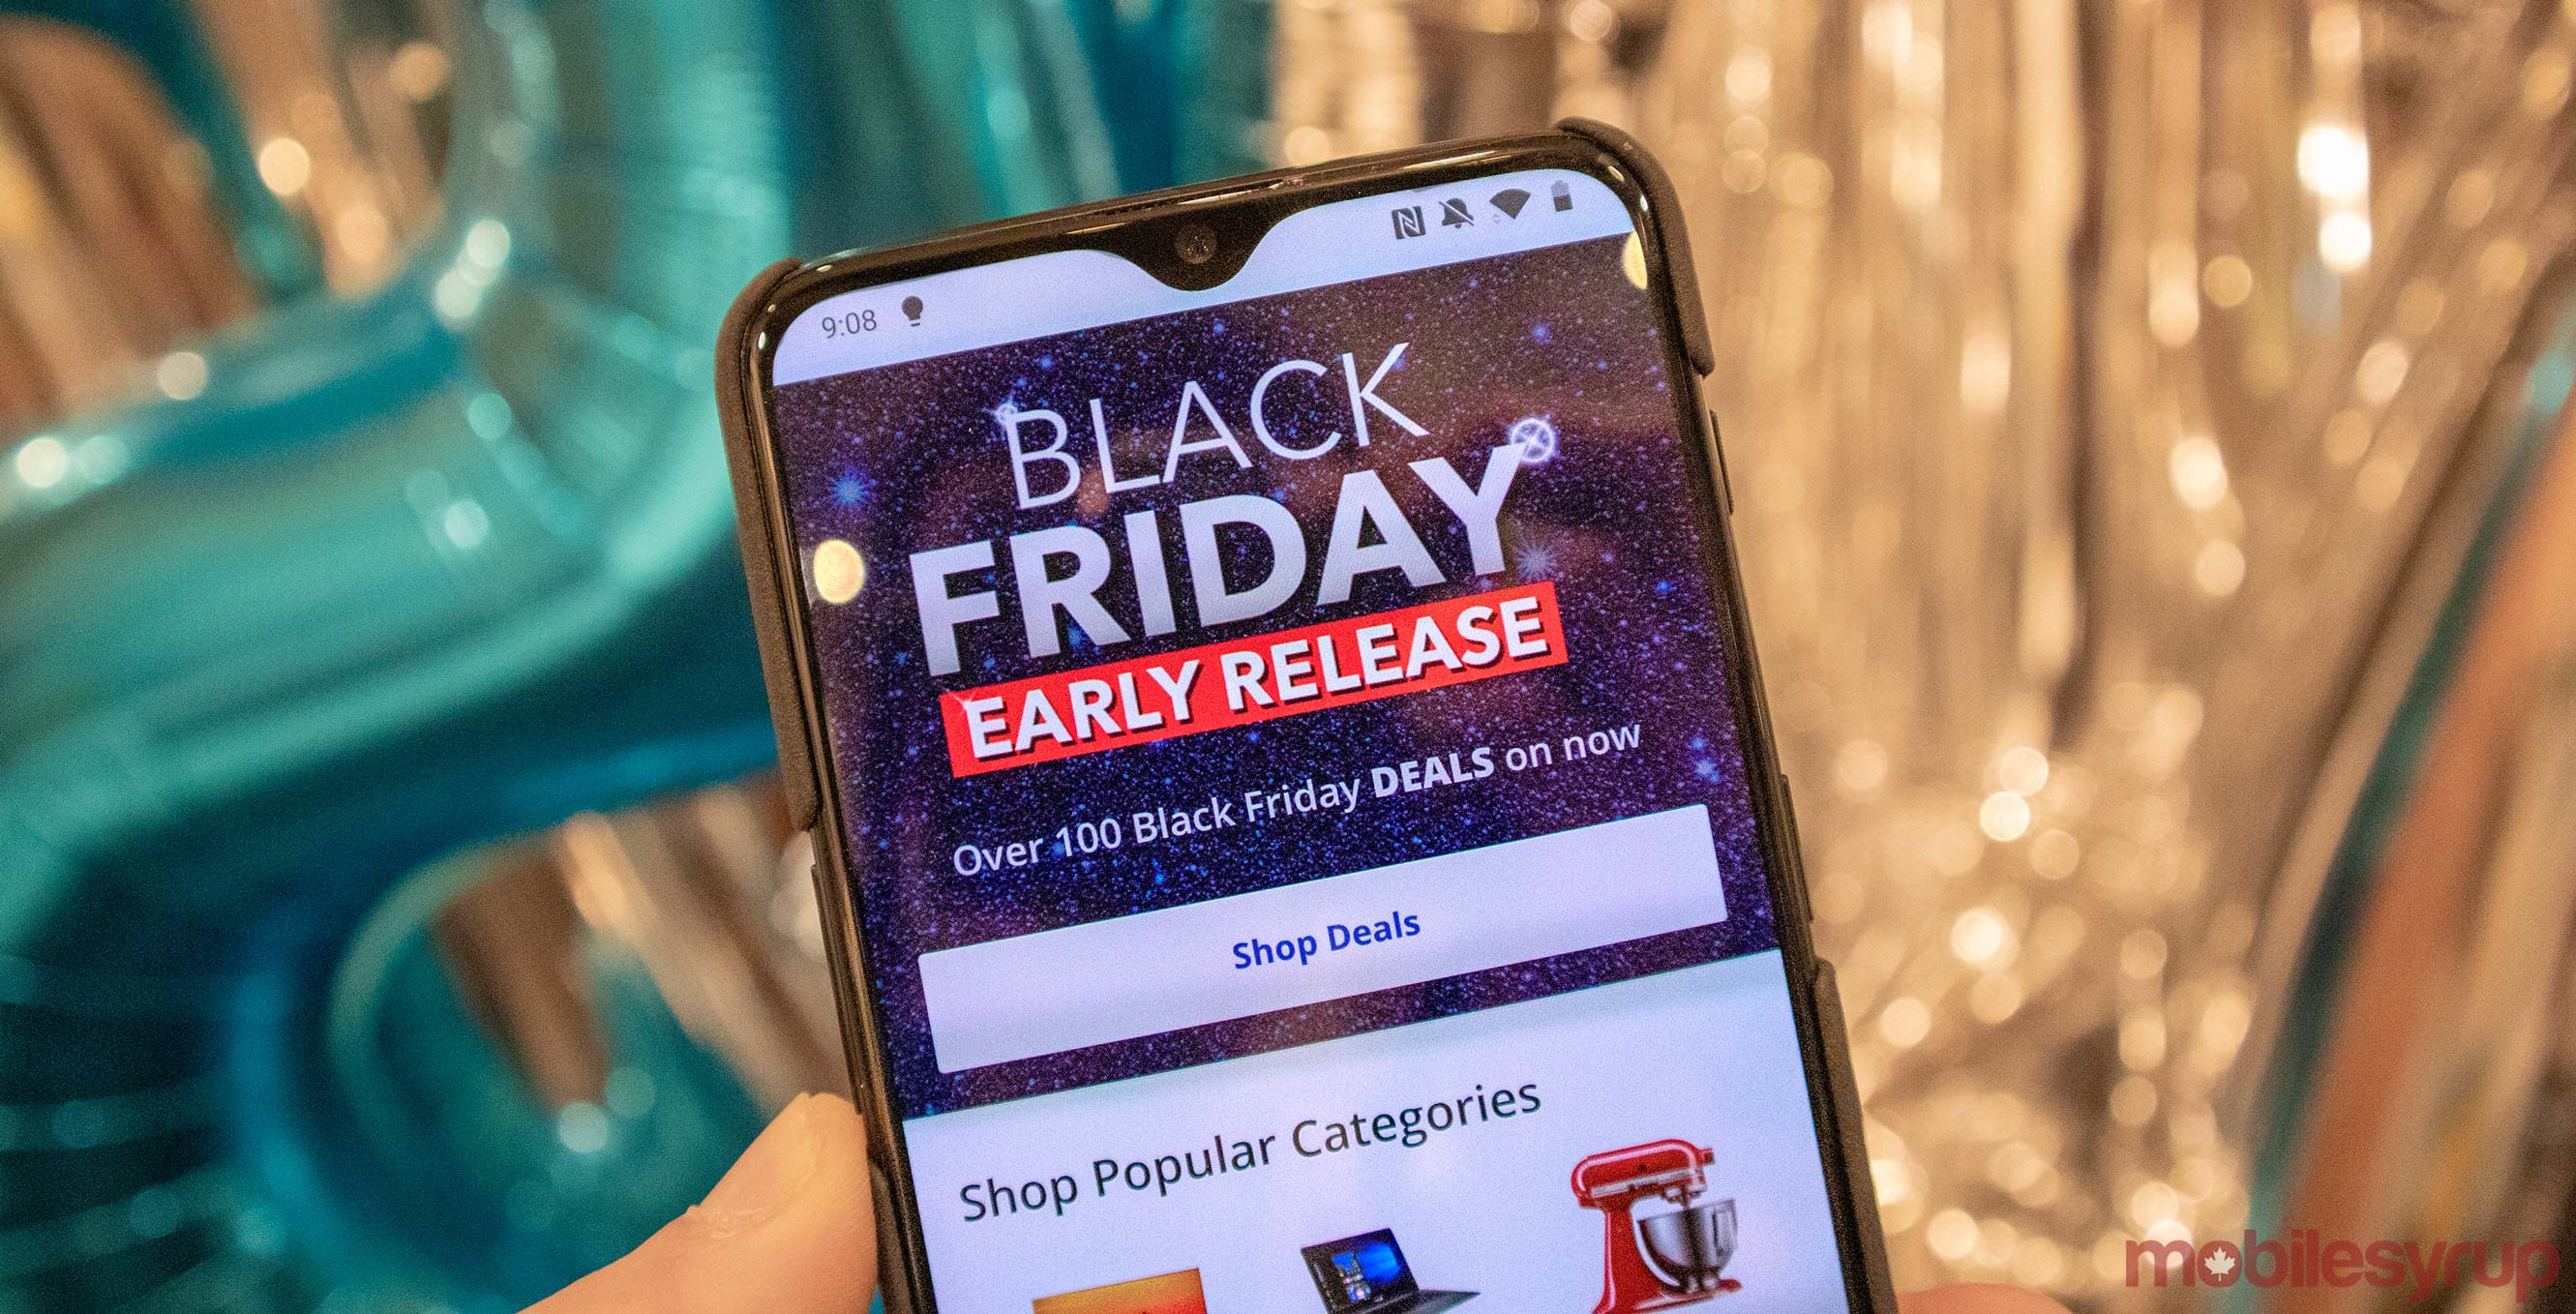 Best Buy Canada goes live with 'Black Friday Early Release' deals